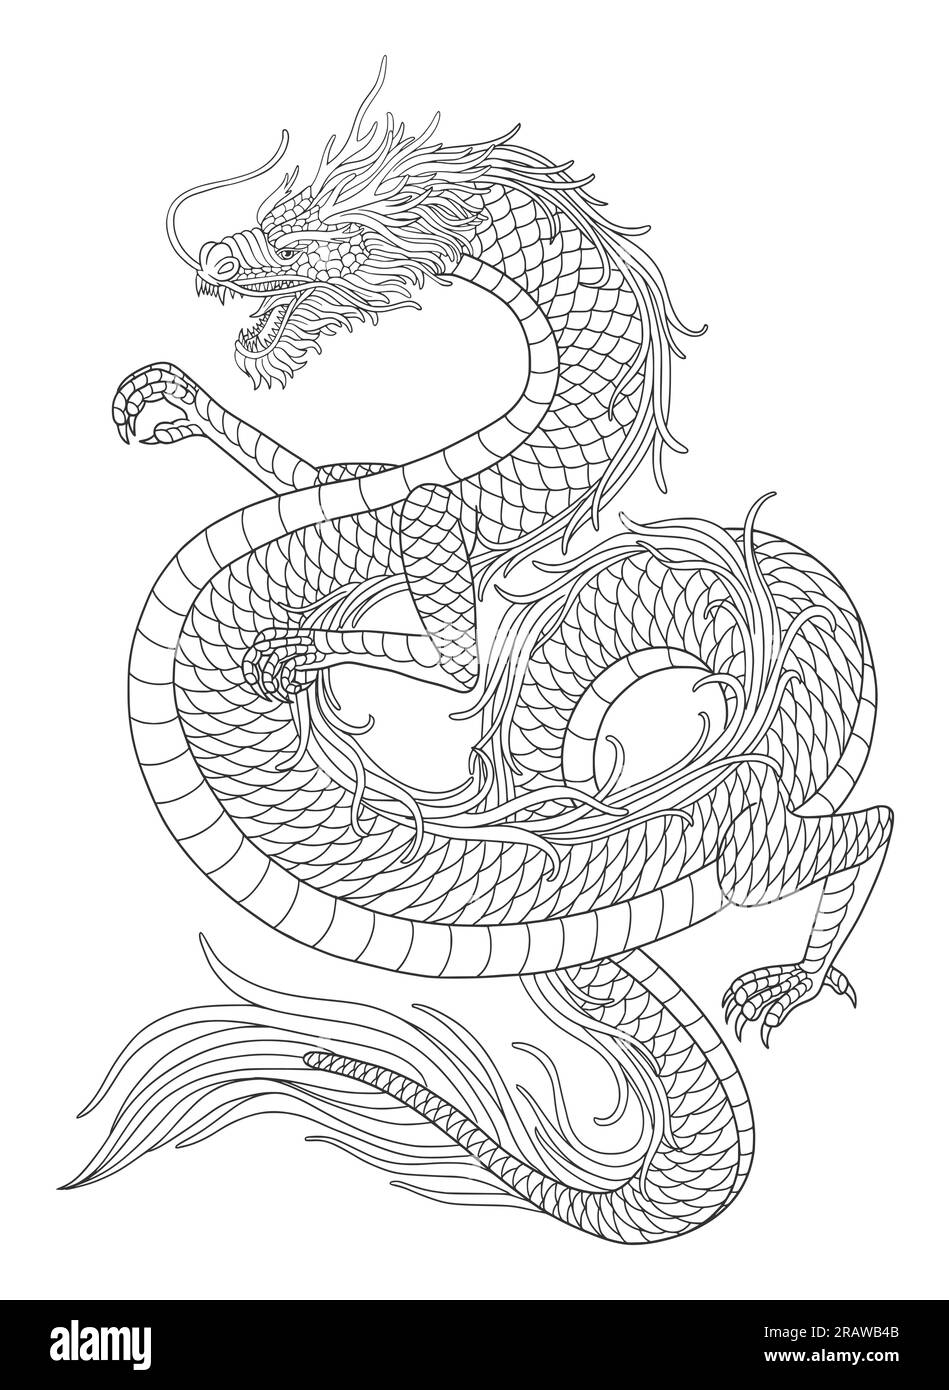 Tattoo art sketch of a japanese dragon  CanStock